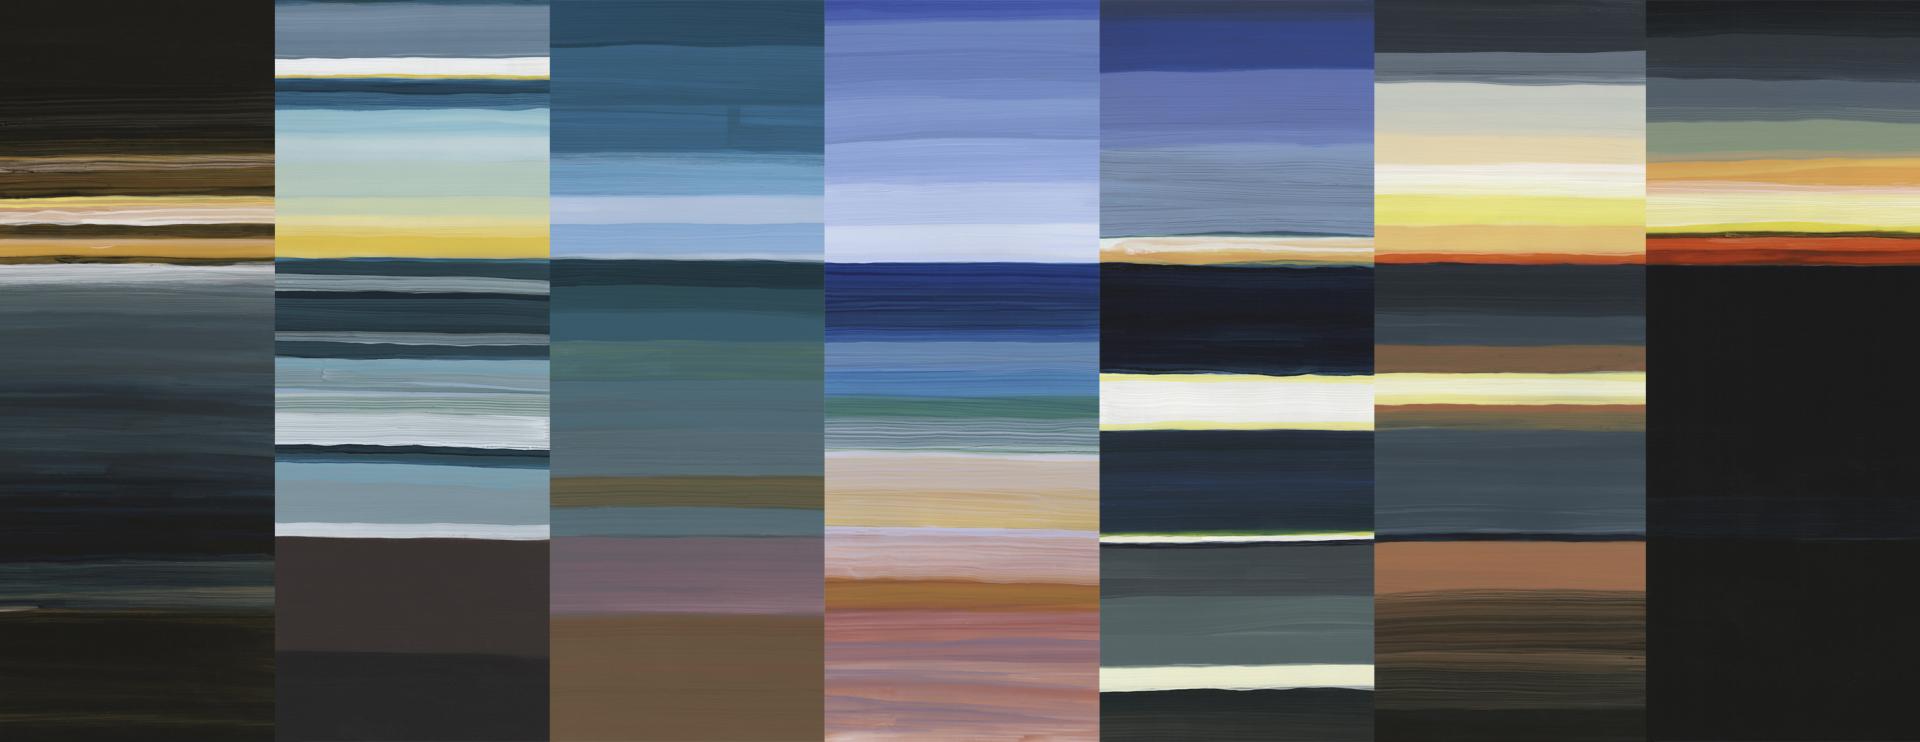 seven panels of horizontal stripes depicting the time of day from sunrise to sunset